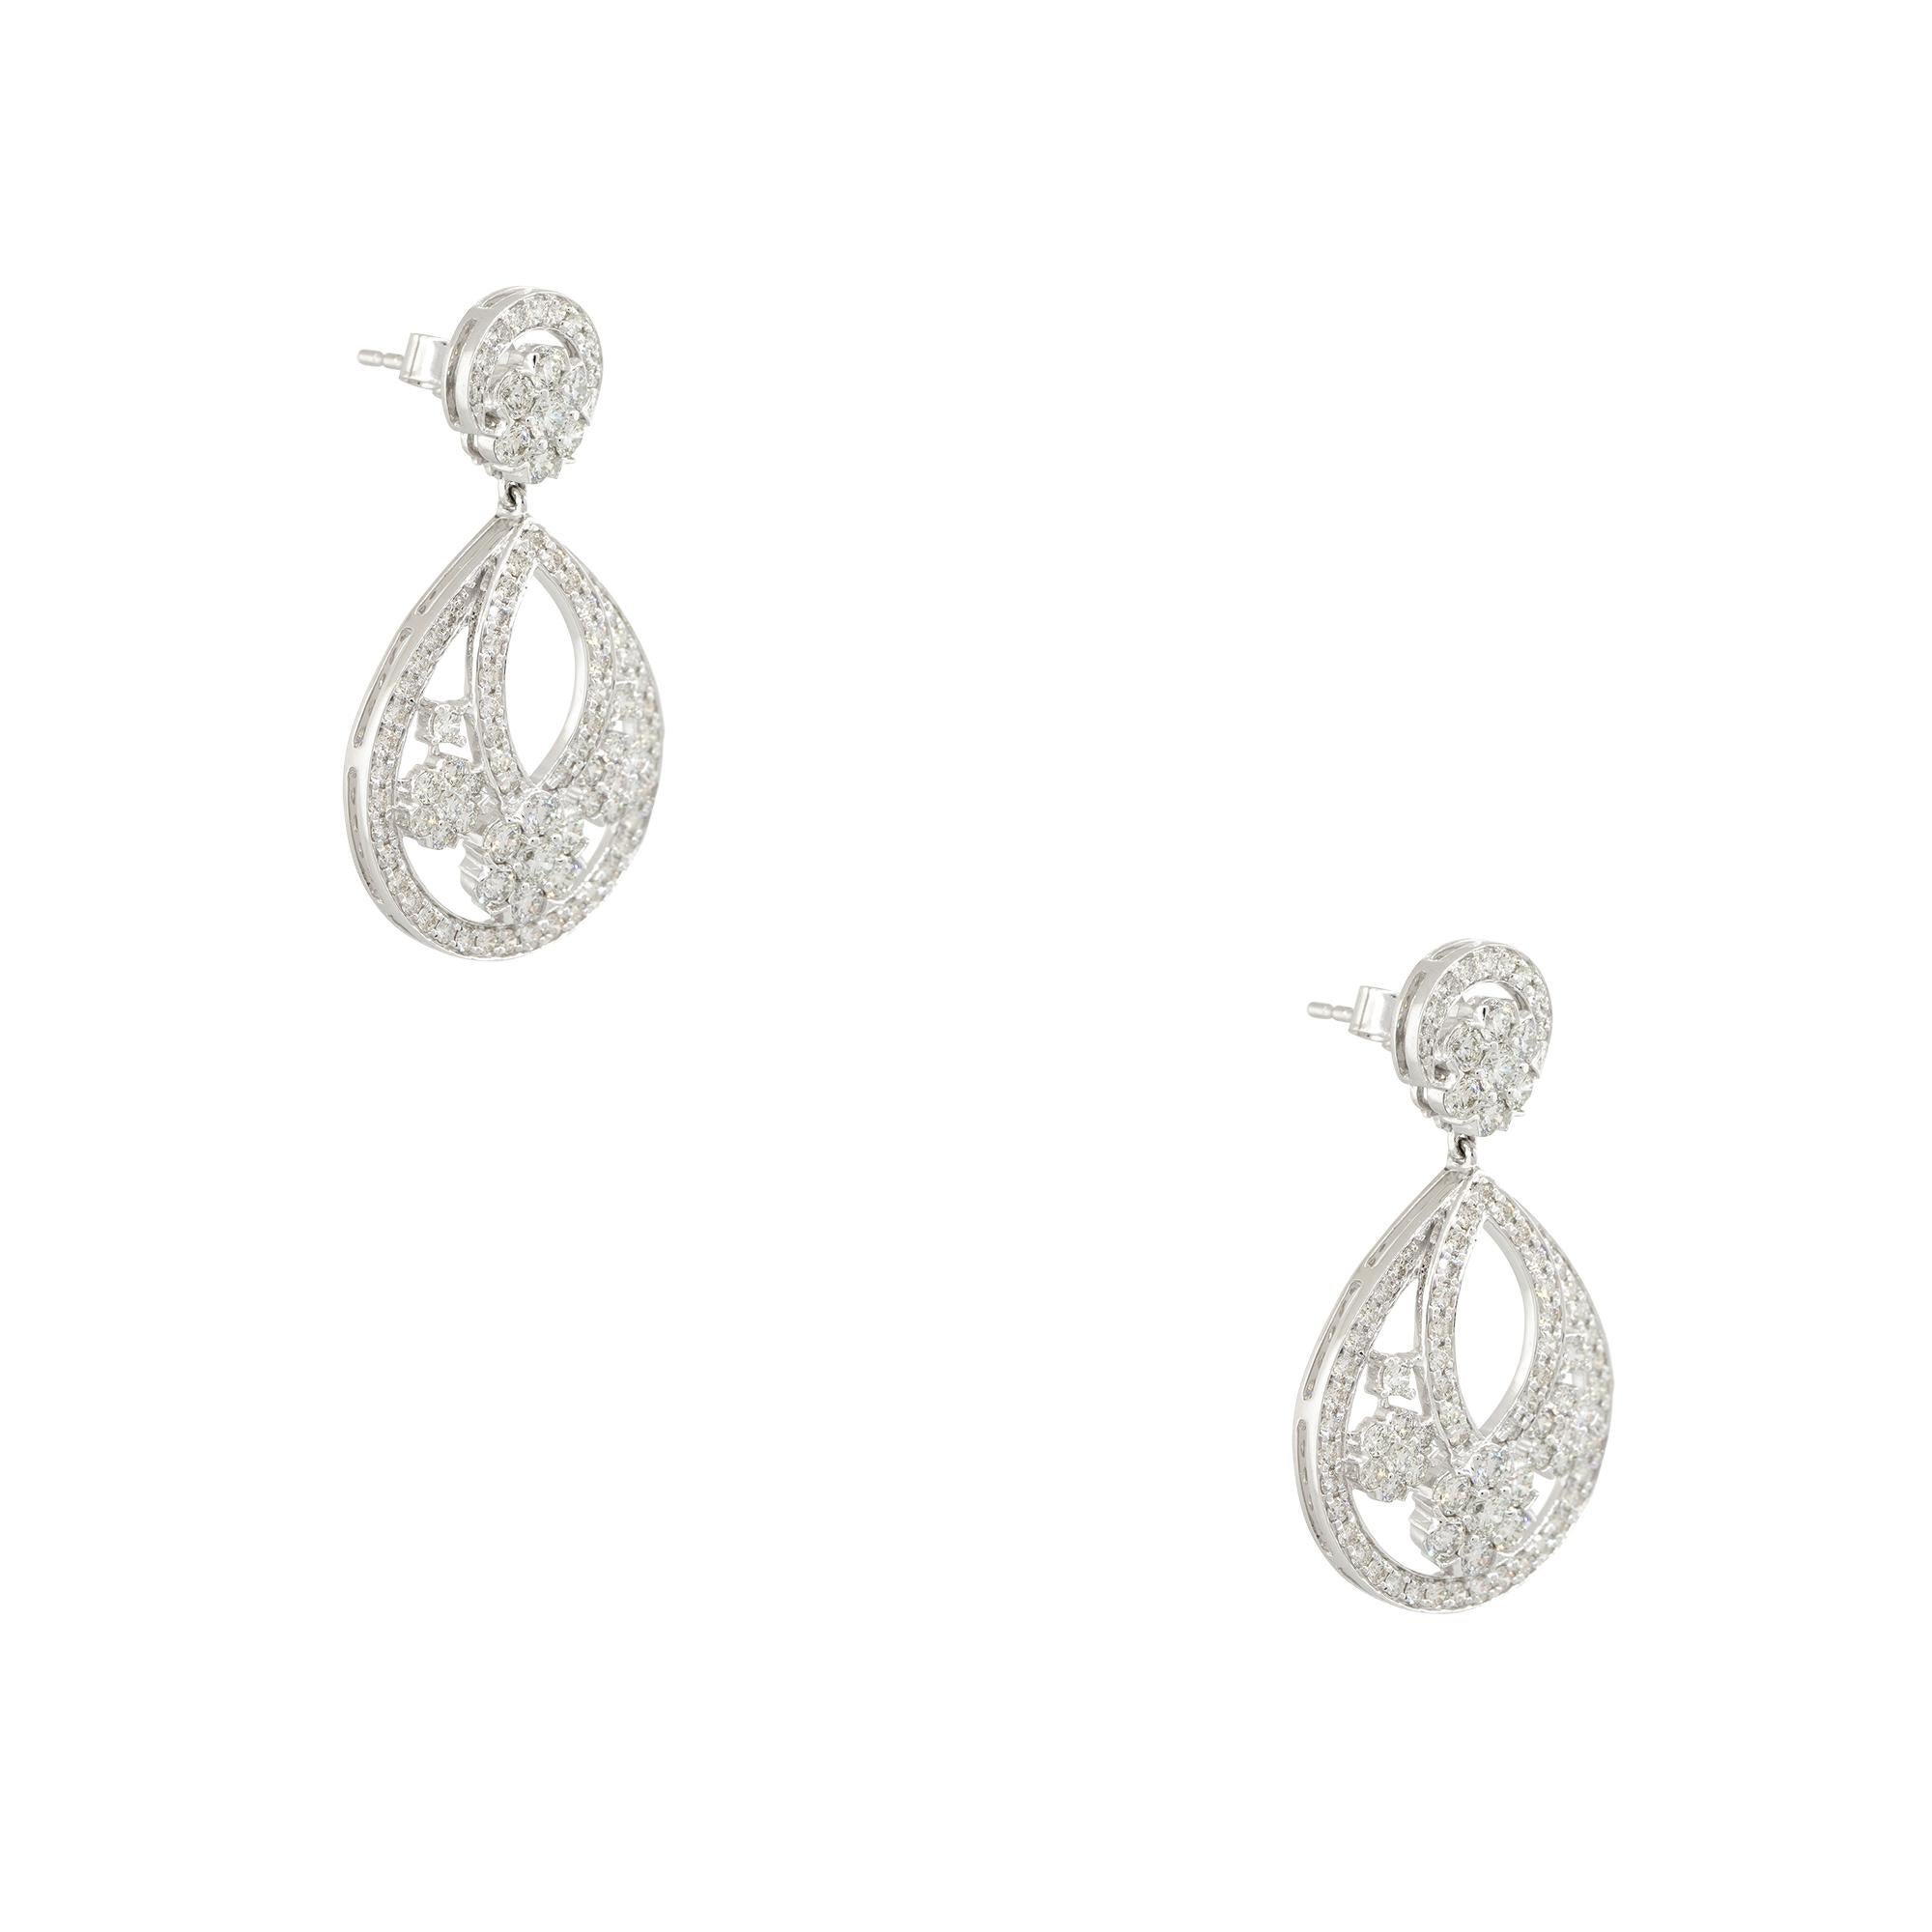 14k White Gold 3.60ctw Diamond Drop Pear Shaped Flower Earrings
Material: 14k White Gold
Diamond Details: Diamonds are approximately 3.60ctw of Round Brilliant cut Diamonds. There are 3 flower designs in each earring and the earrings are shaped like